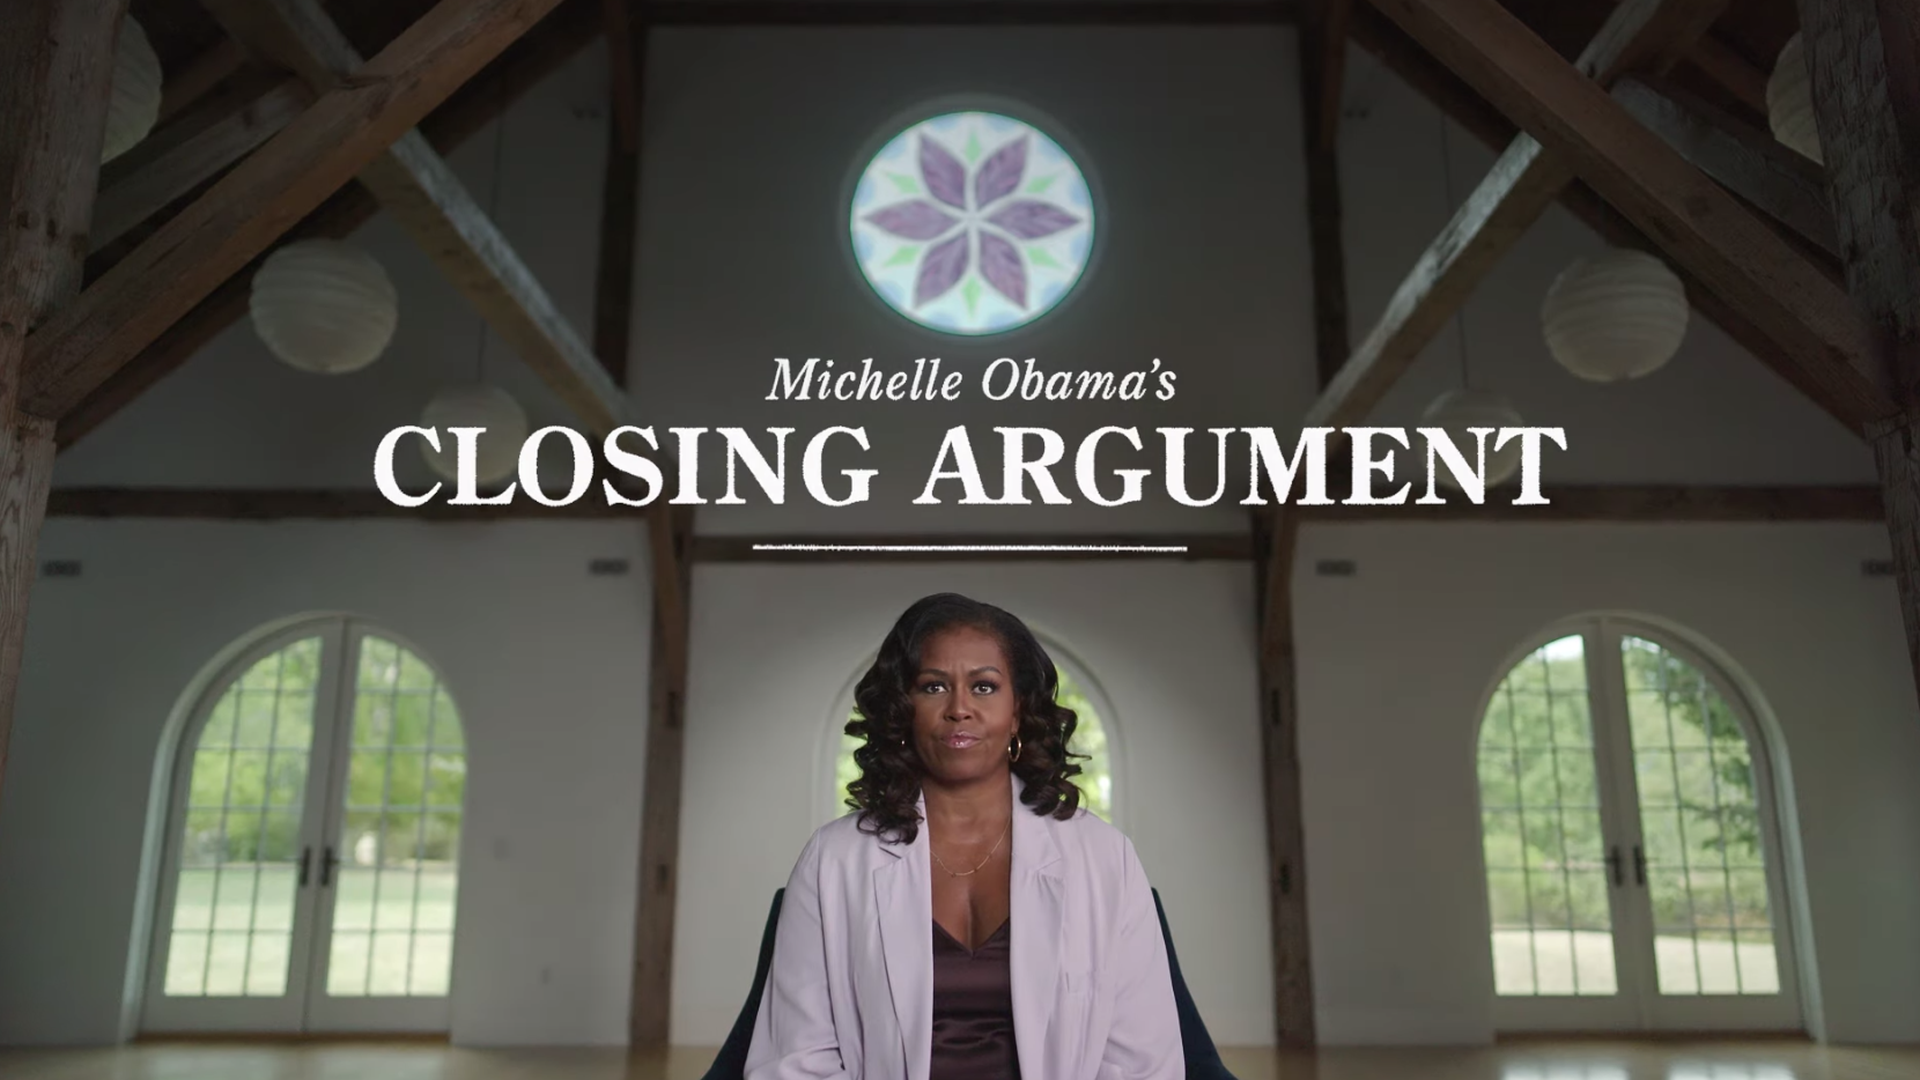 Picture of Michelle Obama in a church